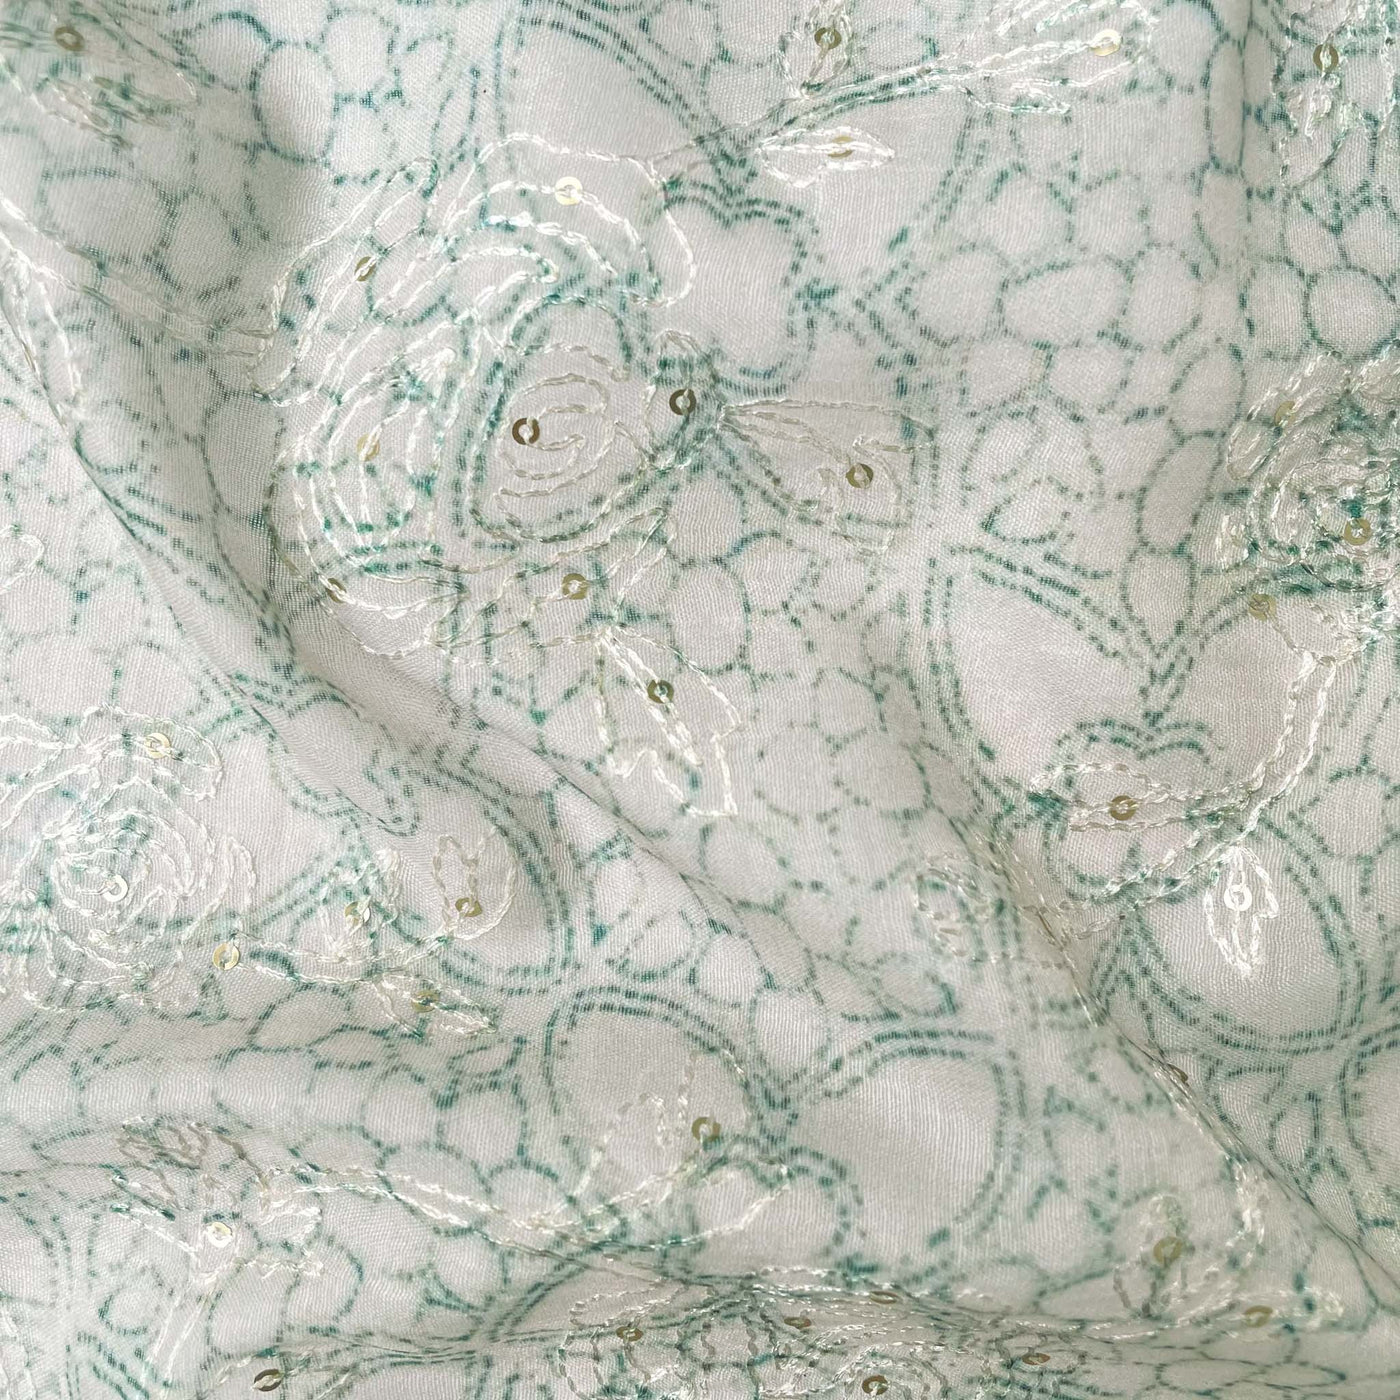 Fabric Pandit Fabric Dusty Ivory Green Abstract Floral Digital Printed Embroidered Cotton Fabric (Width 43 Inches)